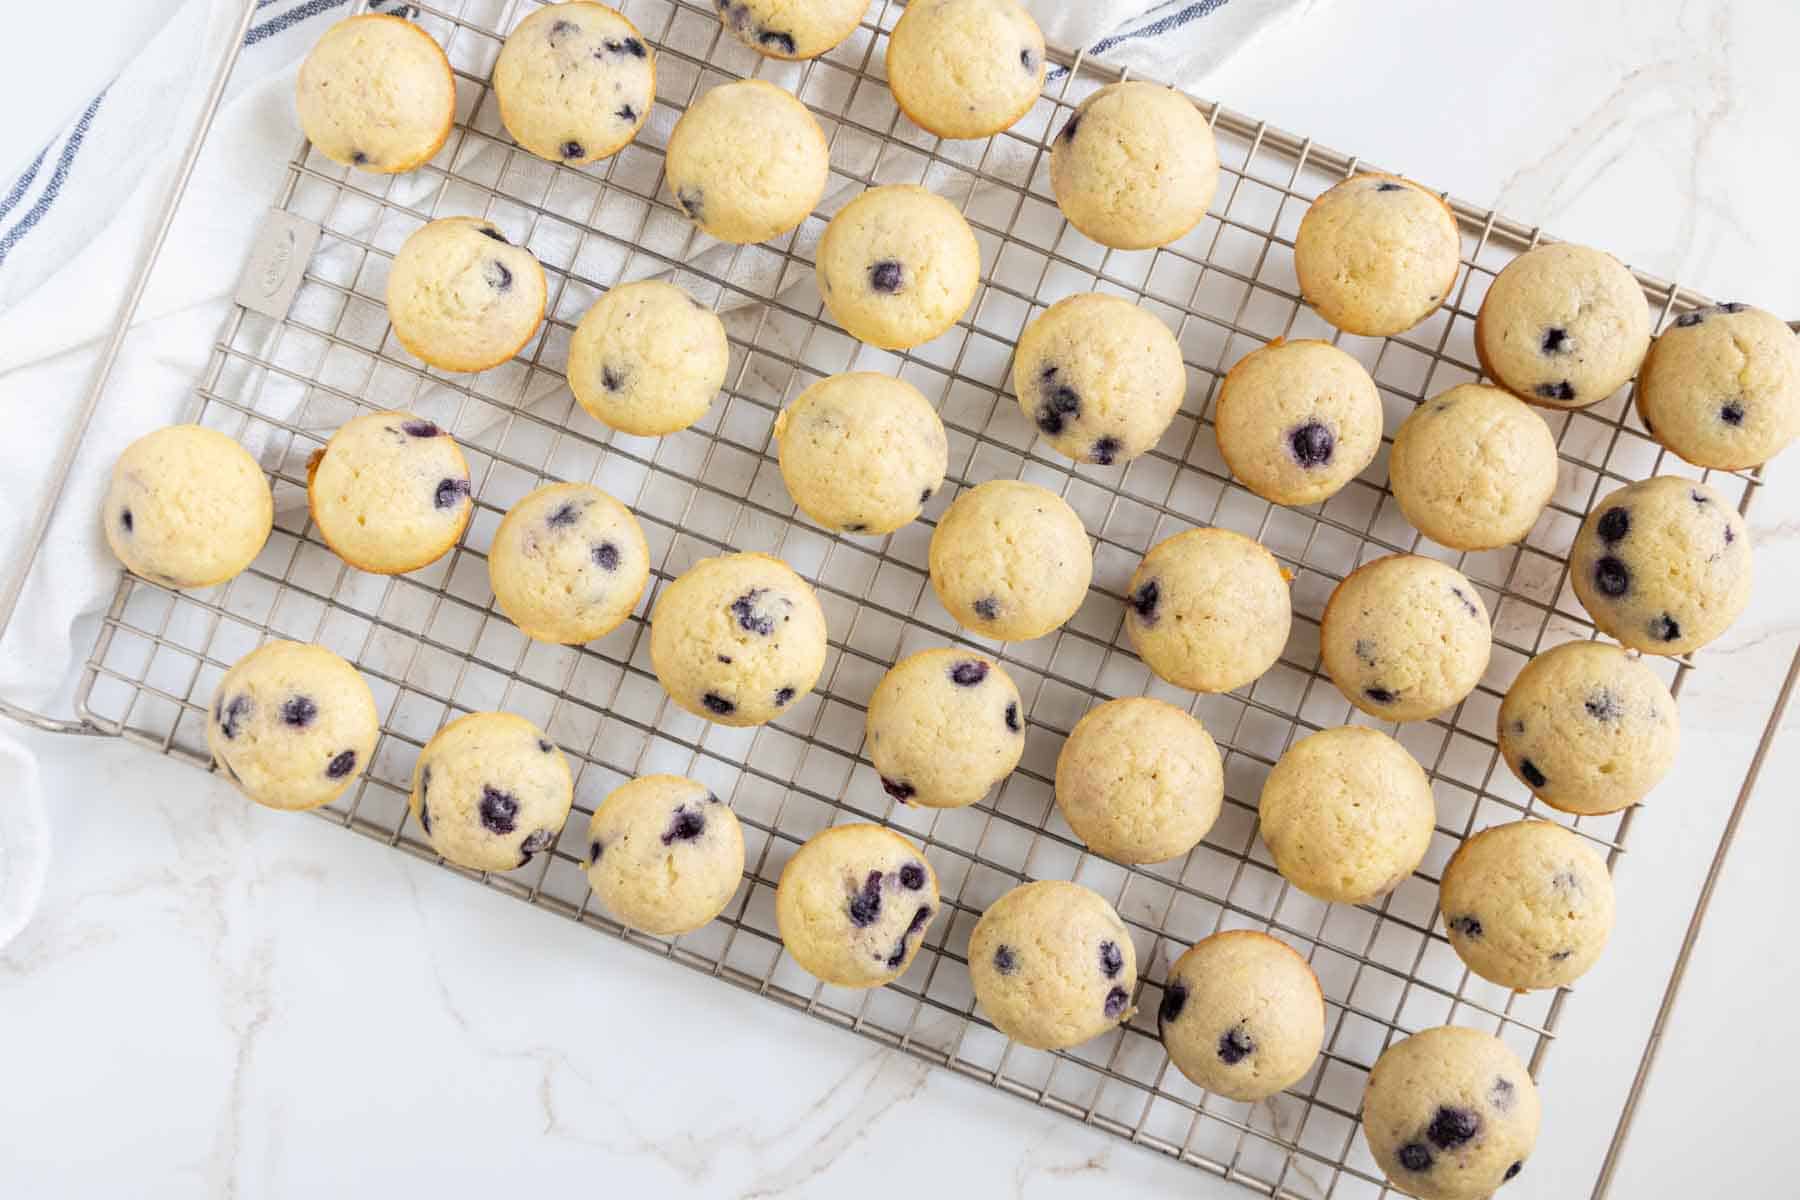 A cooling rack is filled with numerous freshly baked blueberry muffins, evenly spaced and set on a white countertop.